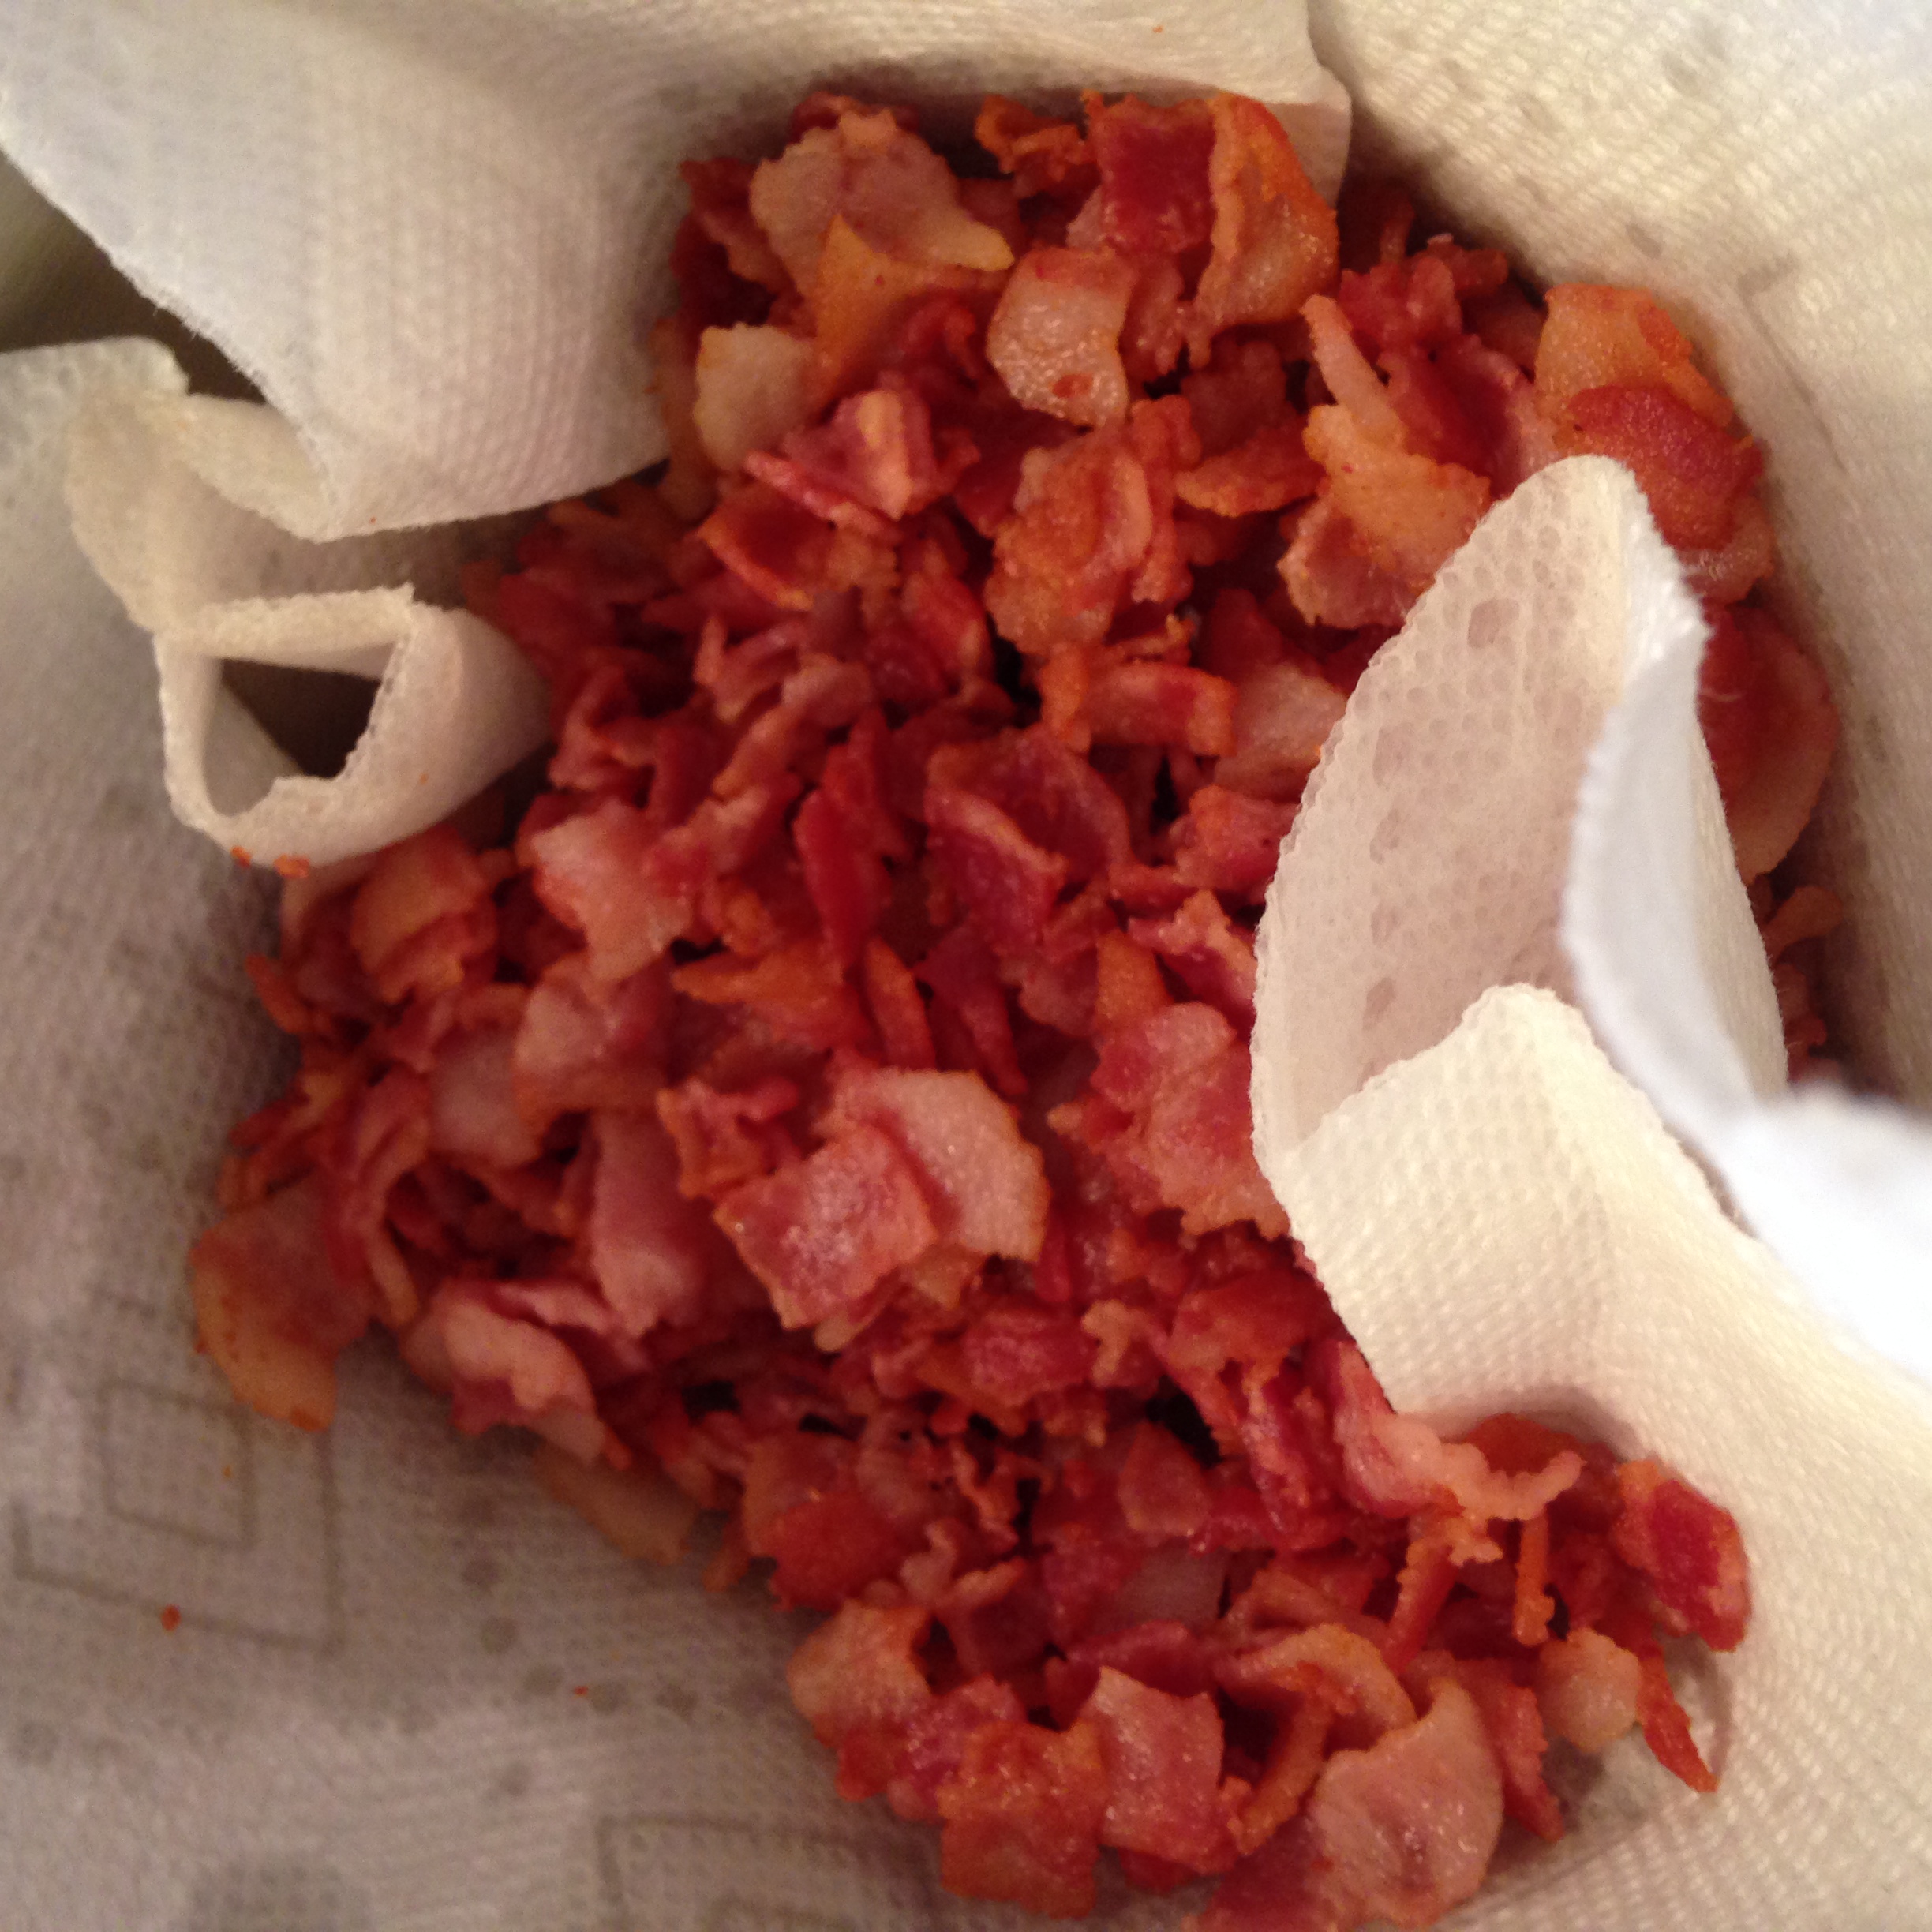 All the bacon bits.